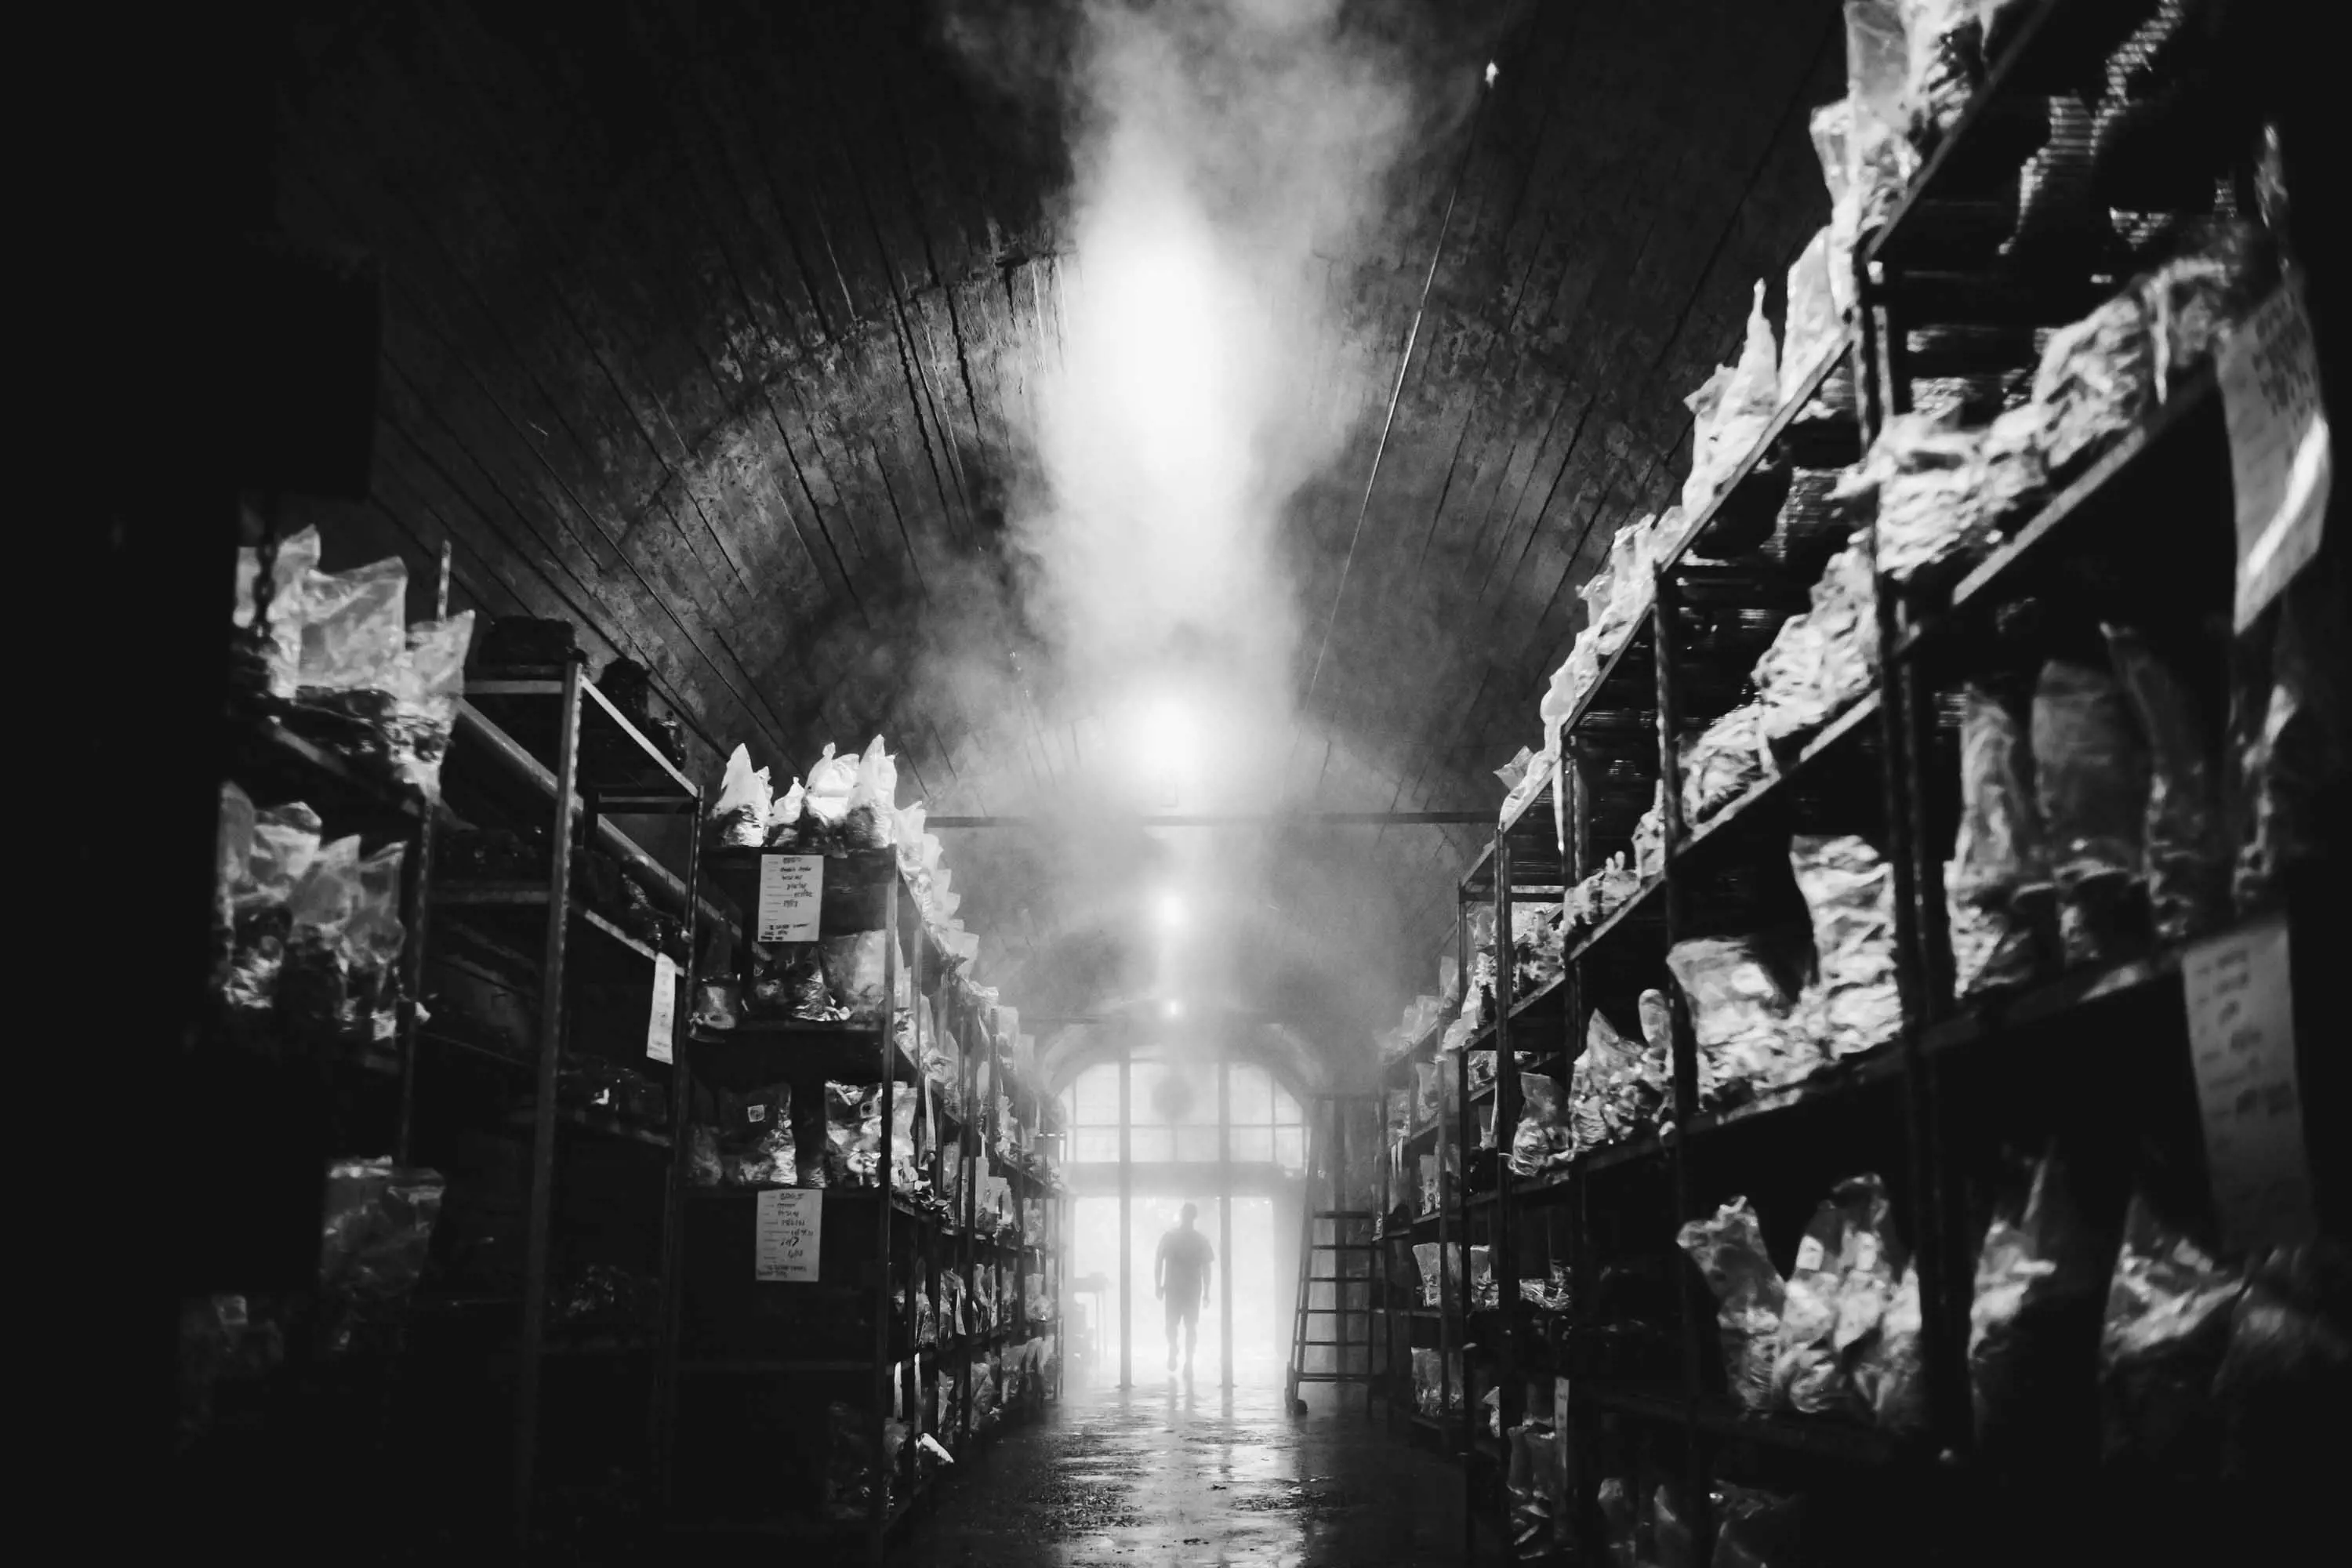 A long, dark tunnel filled with steam is illuminated by the sunlight from outside. Racks of mushrooms are arranged on the walls and a man's silhouette can be seen at the entrance.